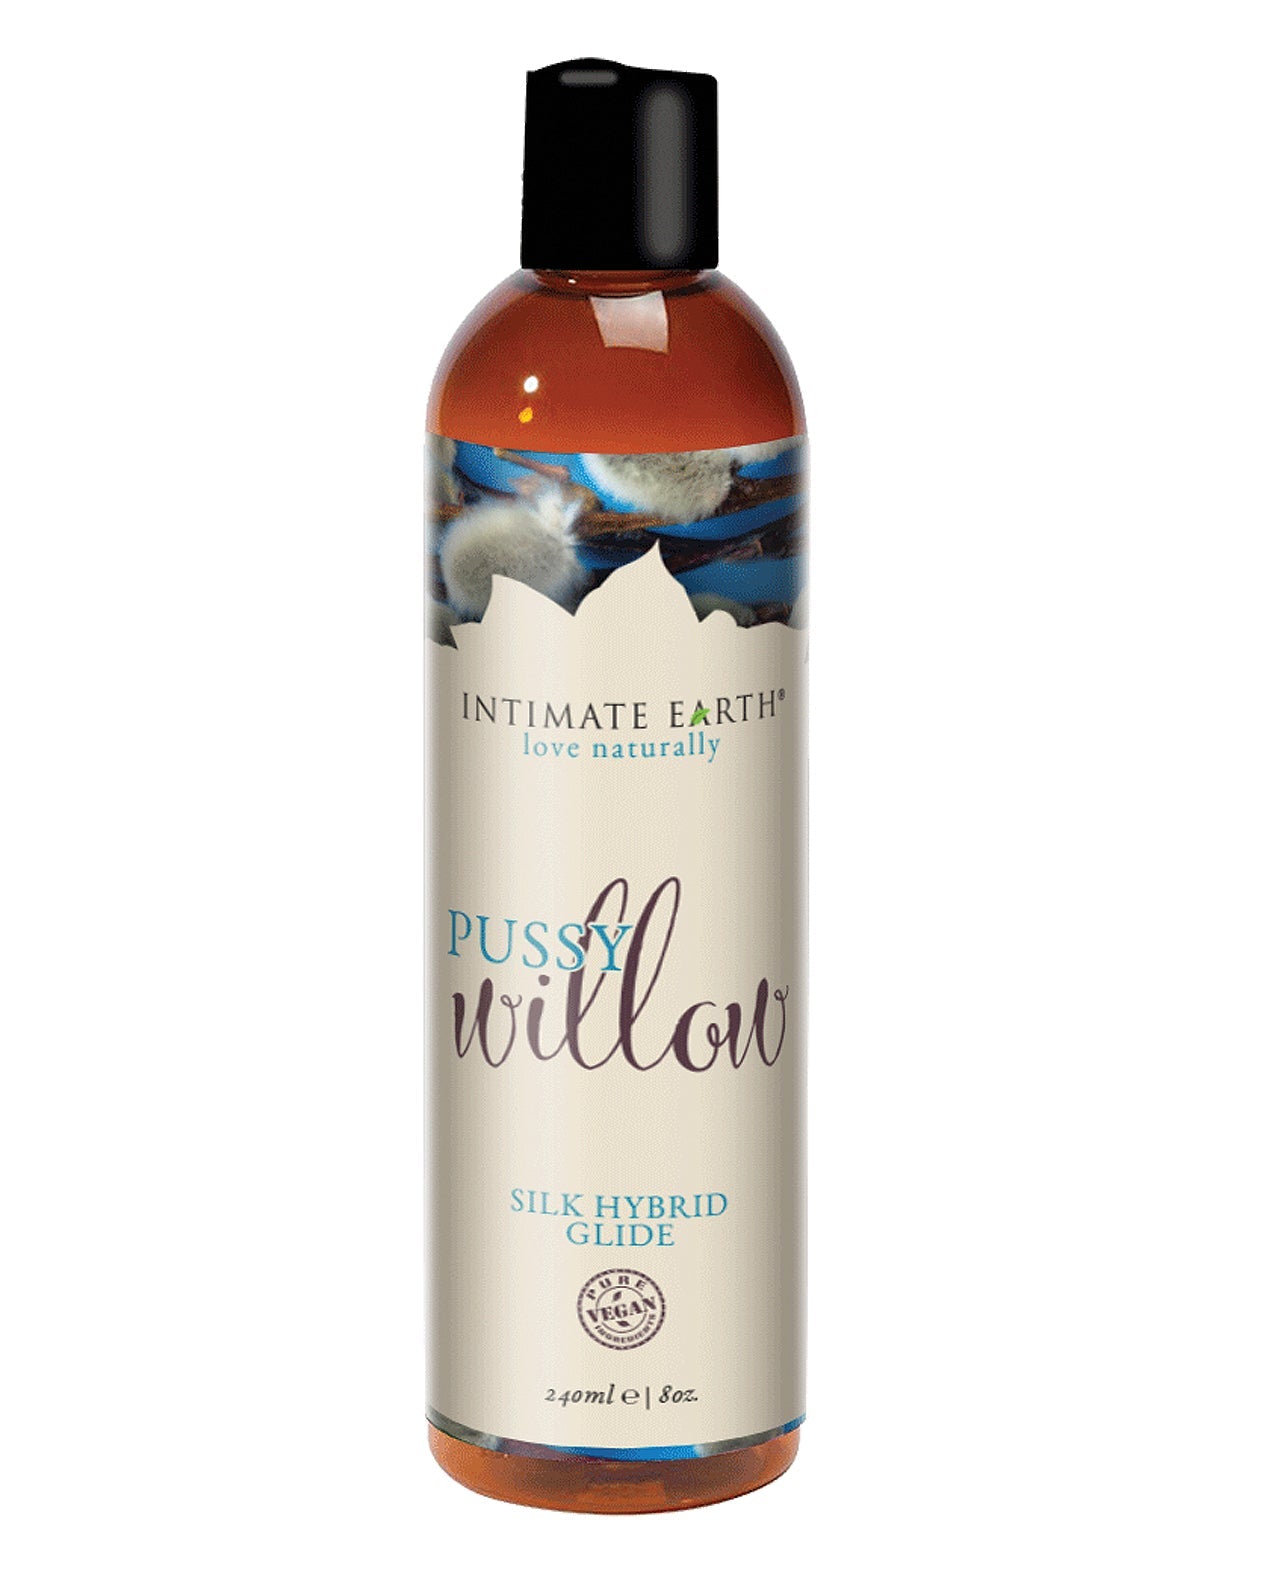 Intimate Earth Pussy Willow Silk Hybrid Glide - 240 ml